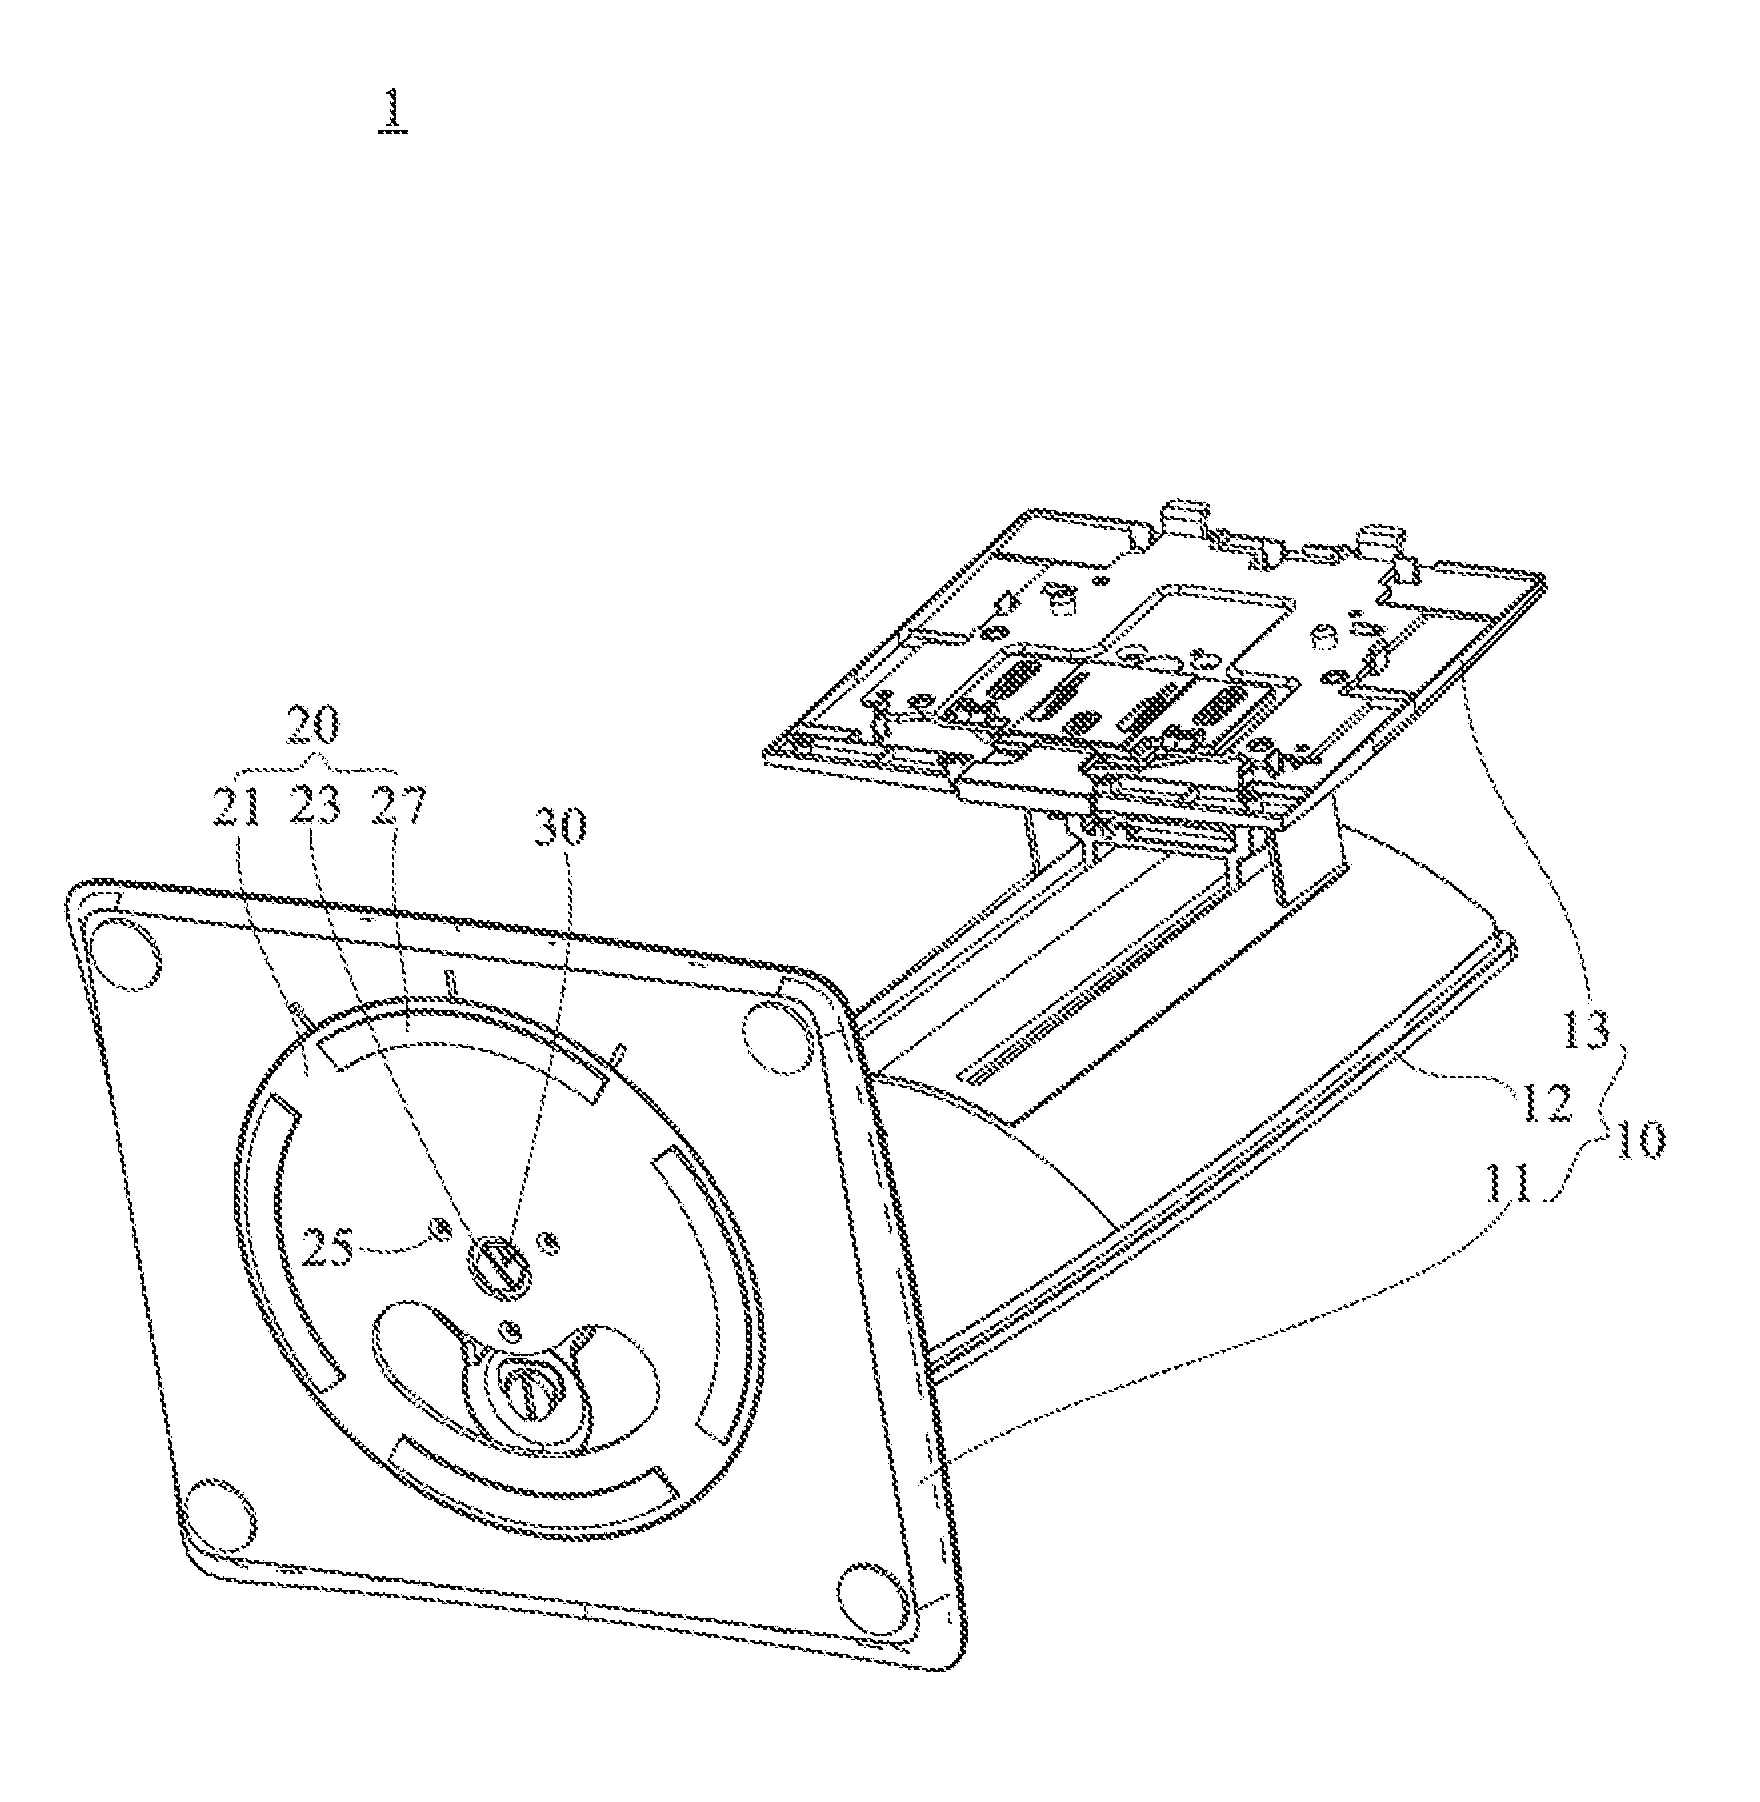 Swivel supporting device